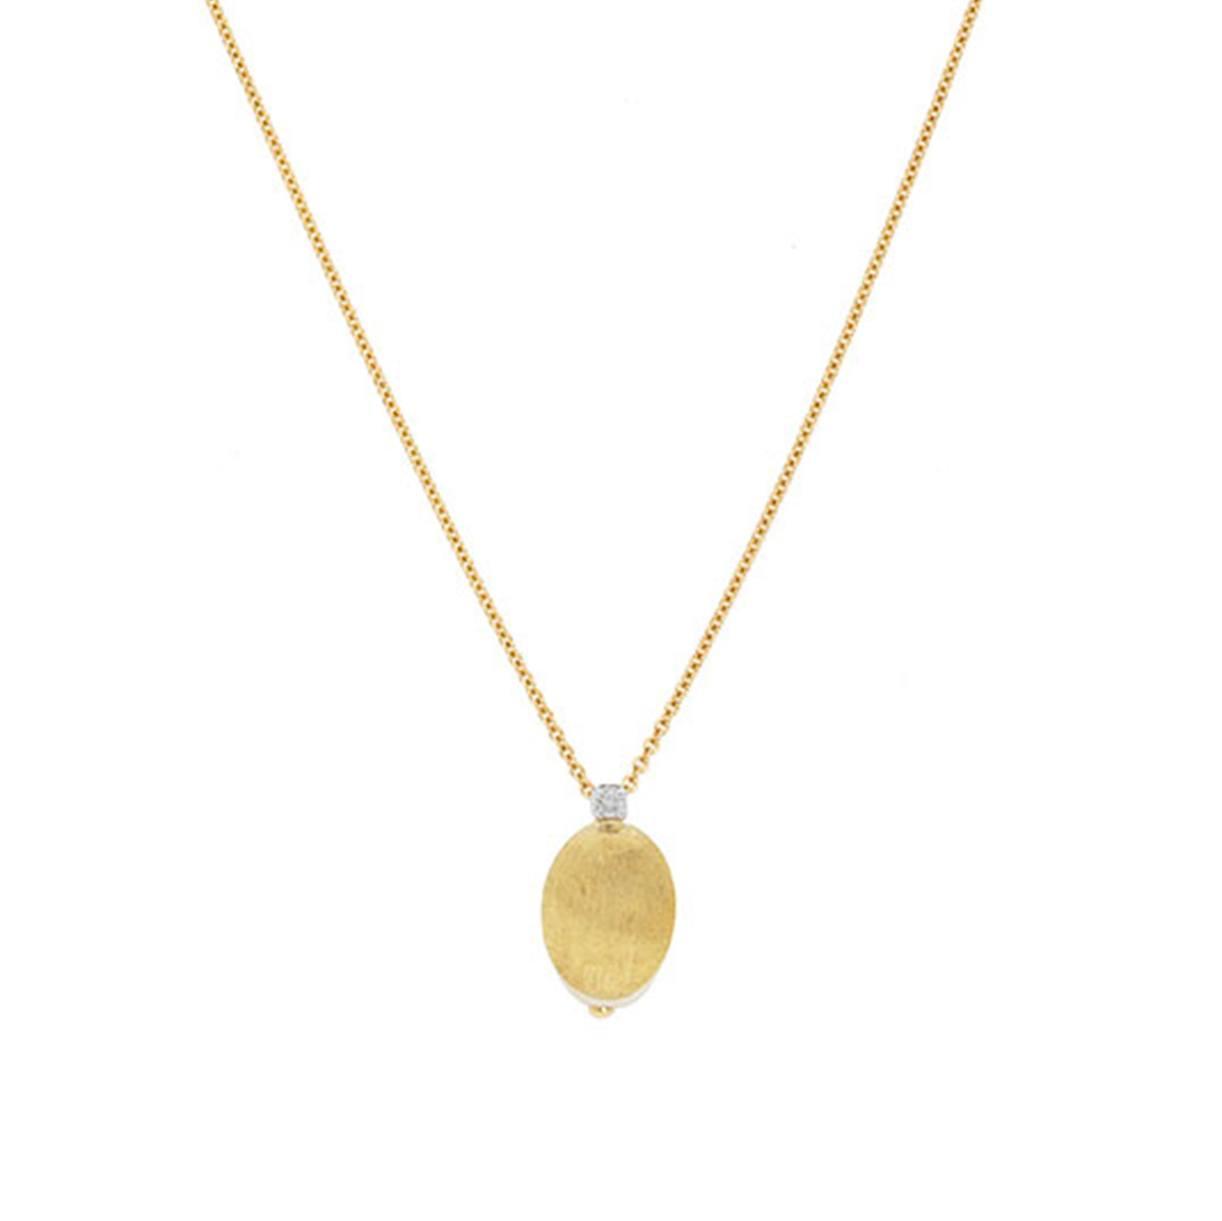 Marco Bicego Yellow & White Gold Satin Finish Oval Bead Diamond Accented Pendant Necklace